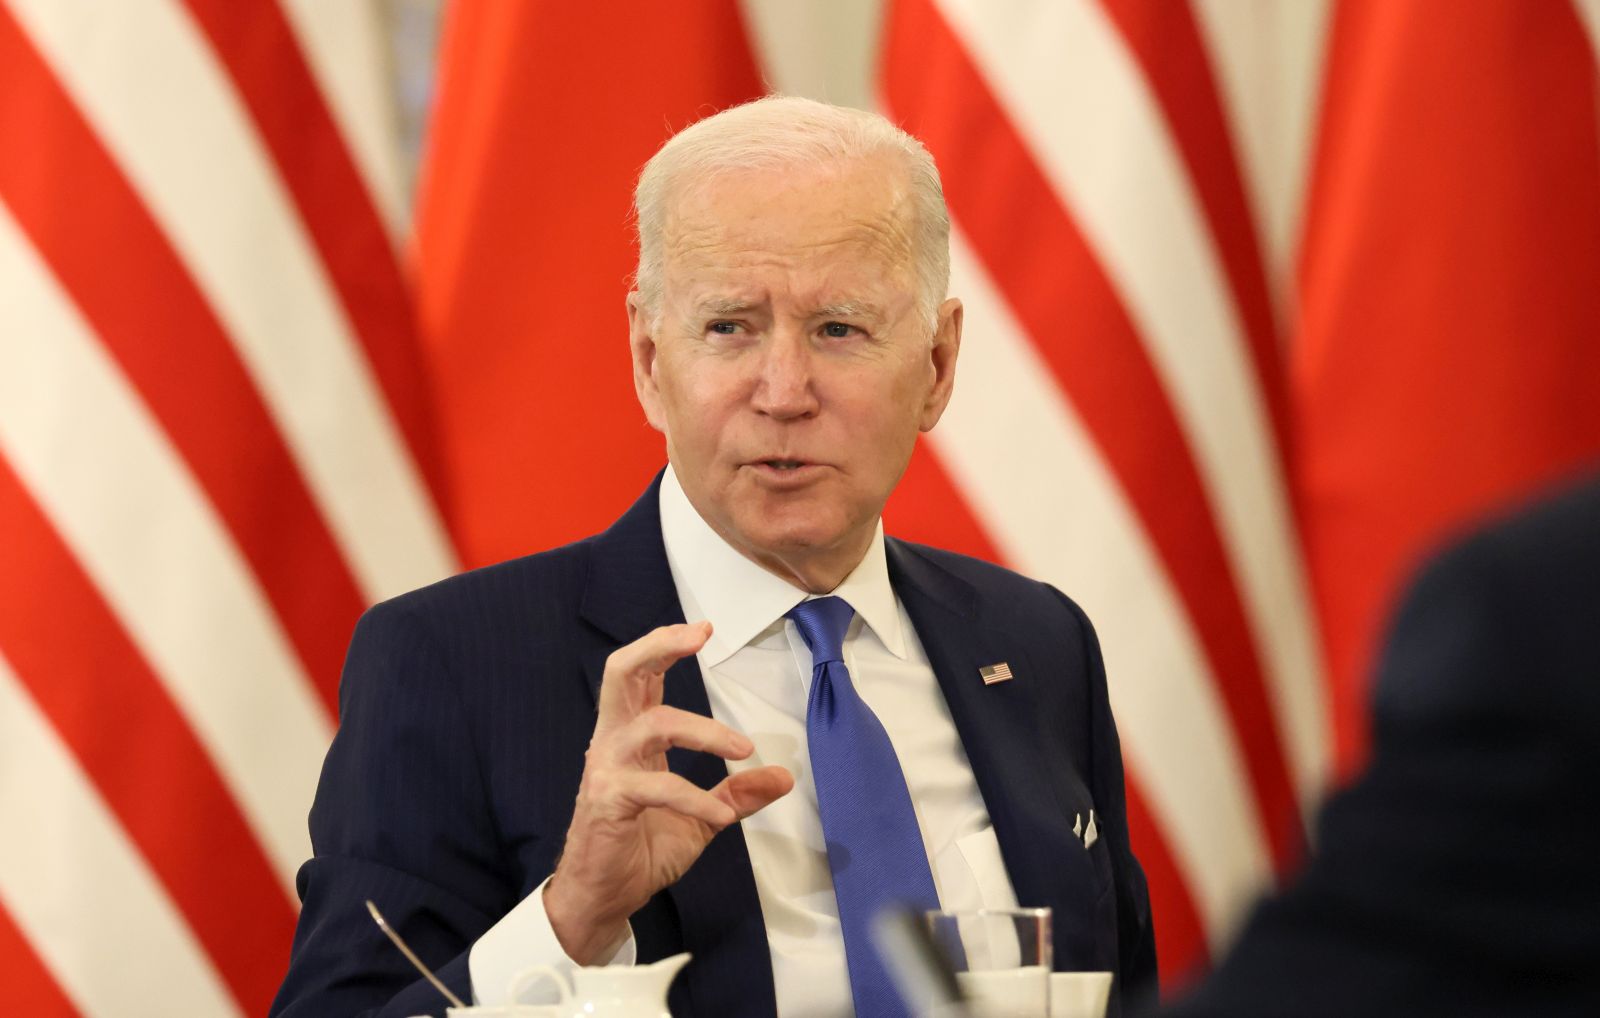 epa09850876 US President Joe Biden during his meeting with the Polish President at the Presidential Palace in Warsaw, Poland, 26 March 2022. US President Biden arrived in Poland for a two-days visit during which he is scheduled to hold talks with his Polish counterpart and make an address at the Royal Castle in Warsaw. Biden is coming to Poland straight from Brussels, where he attended an extraordinary Nato summit, a European Council meeting and a G7 summit on 24 March.  EPA/Marcin Obara POLAND OUT